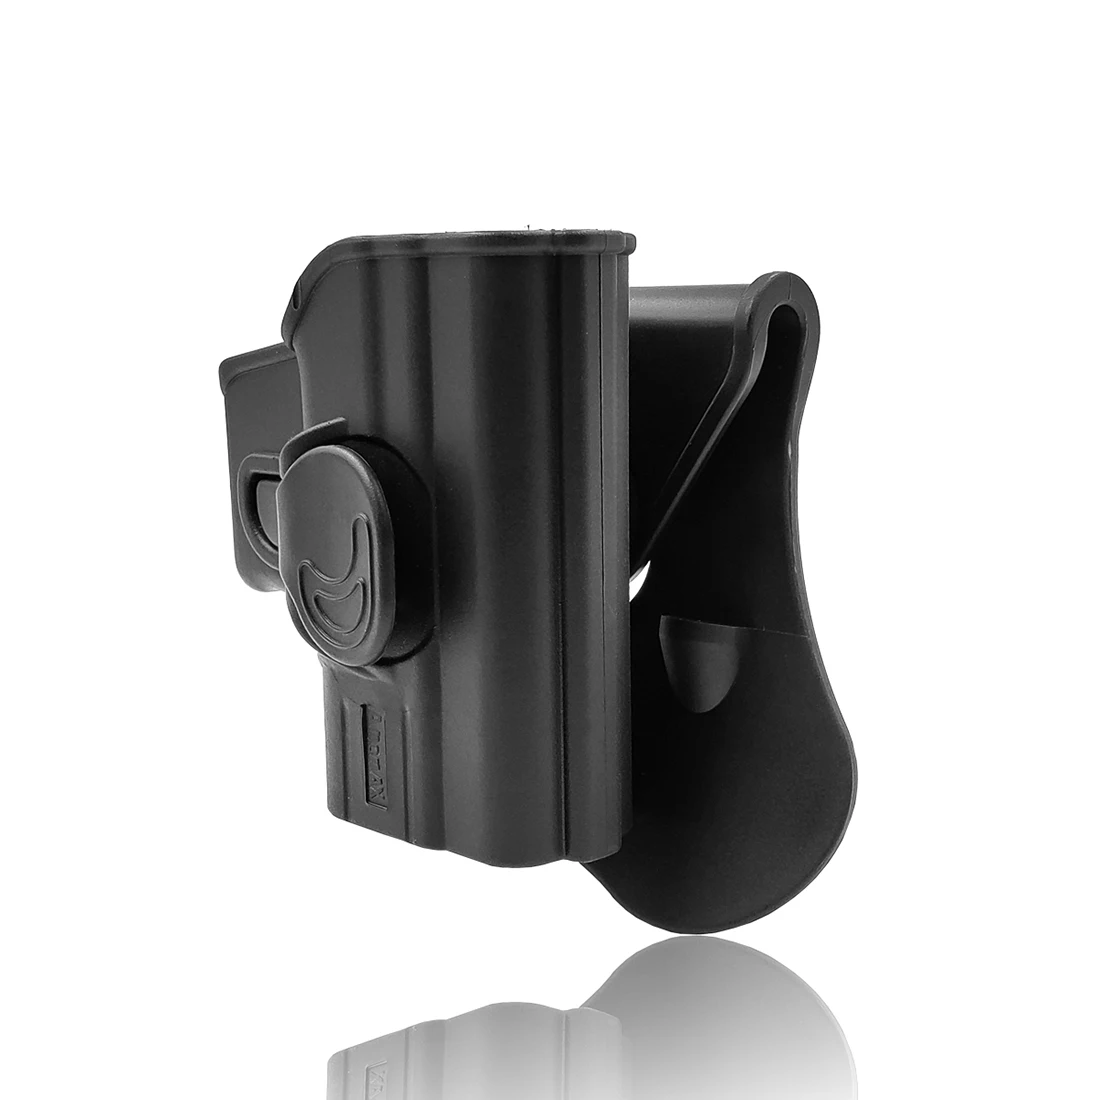 

Amomax Adjustable Tactical Holster For HS2000 (Springfield XD)/45ACP/ 9mm/SubCompact 3” 9mm/Girsan MC28 - Right-Handed